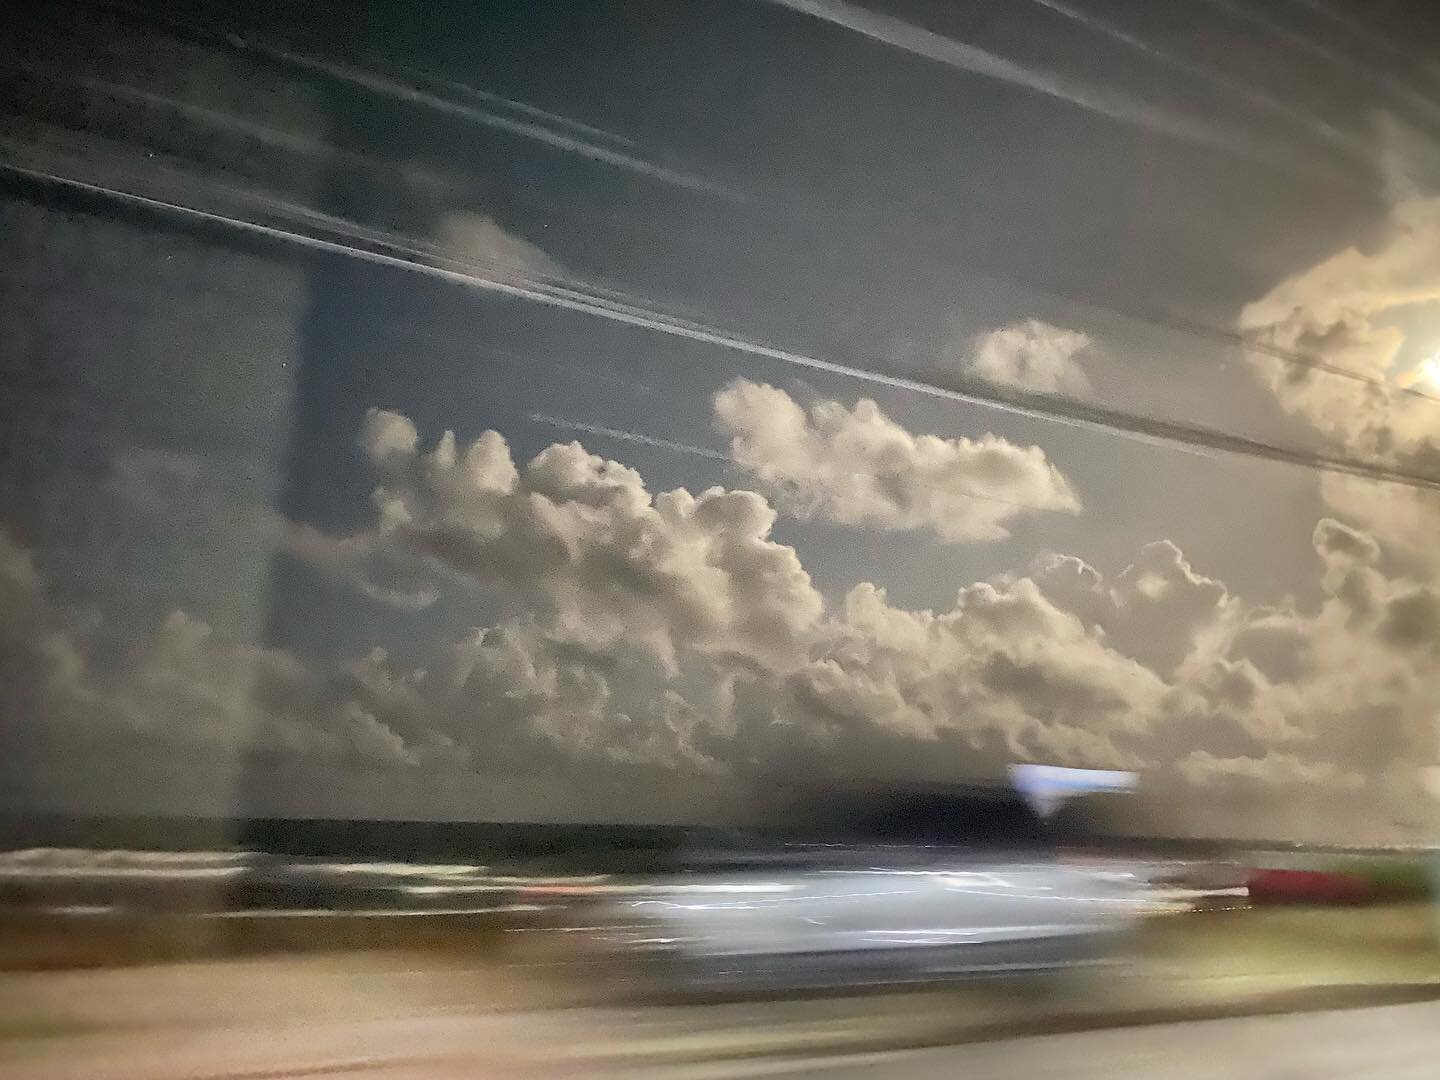 A night in Sosua in the Dominican Republic&hellip; capturing the instant&hellip;. #dominicanrepublic #carabean #island #clouds #sky #light #speed #night #photooftheday #photo